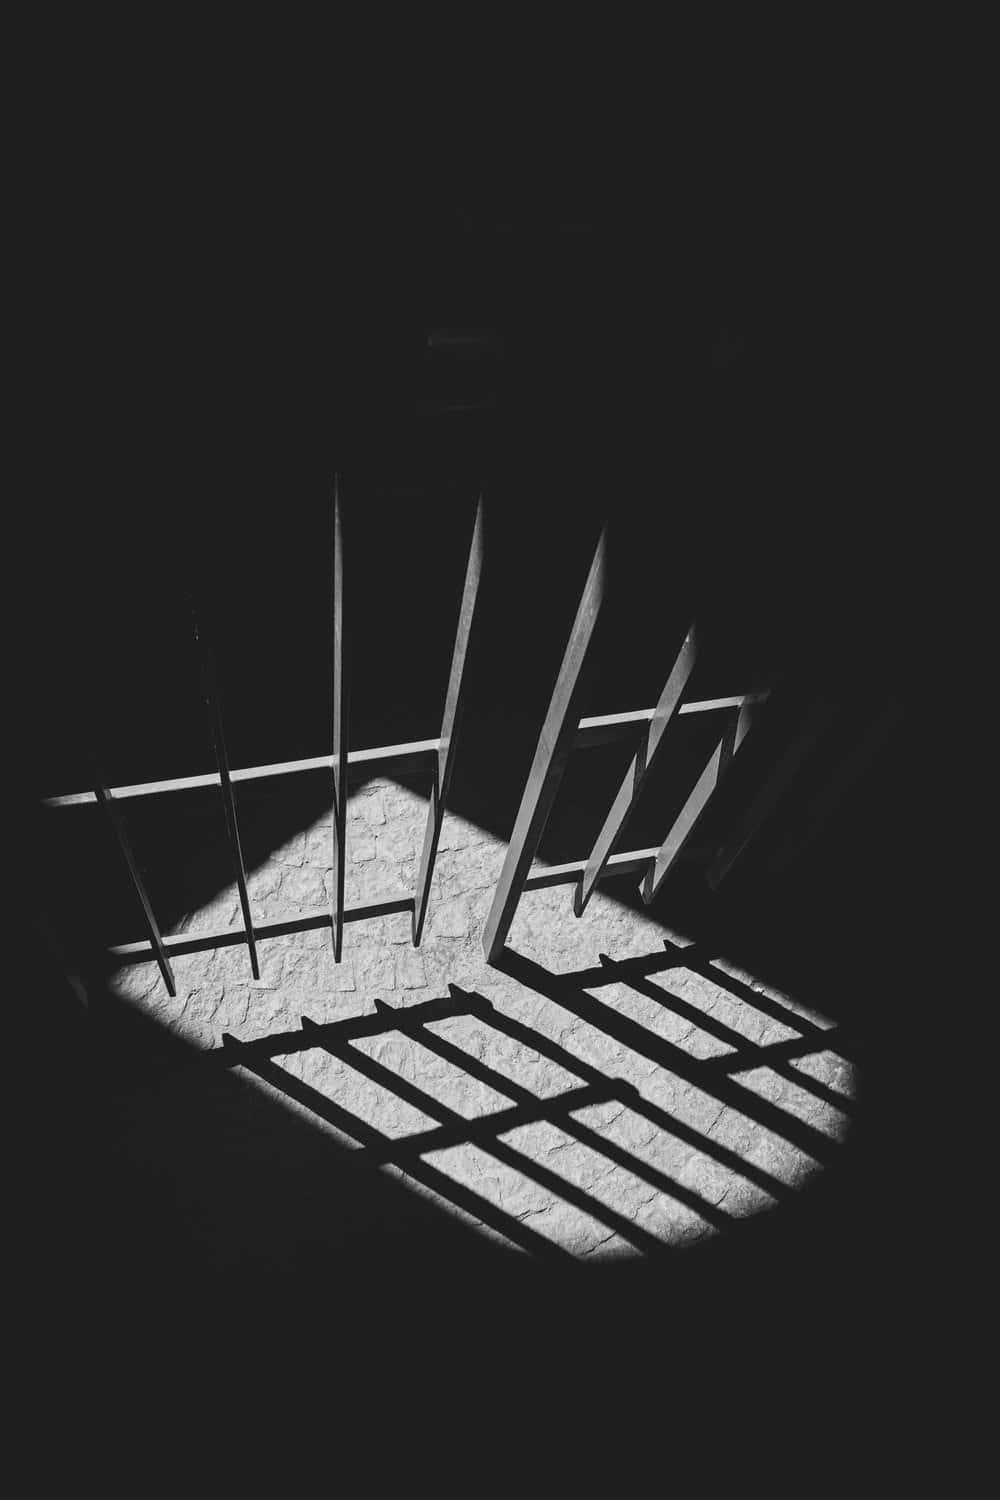 A Black And White Photo Of A Prison Cell